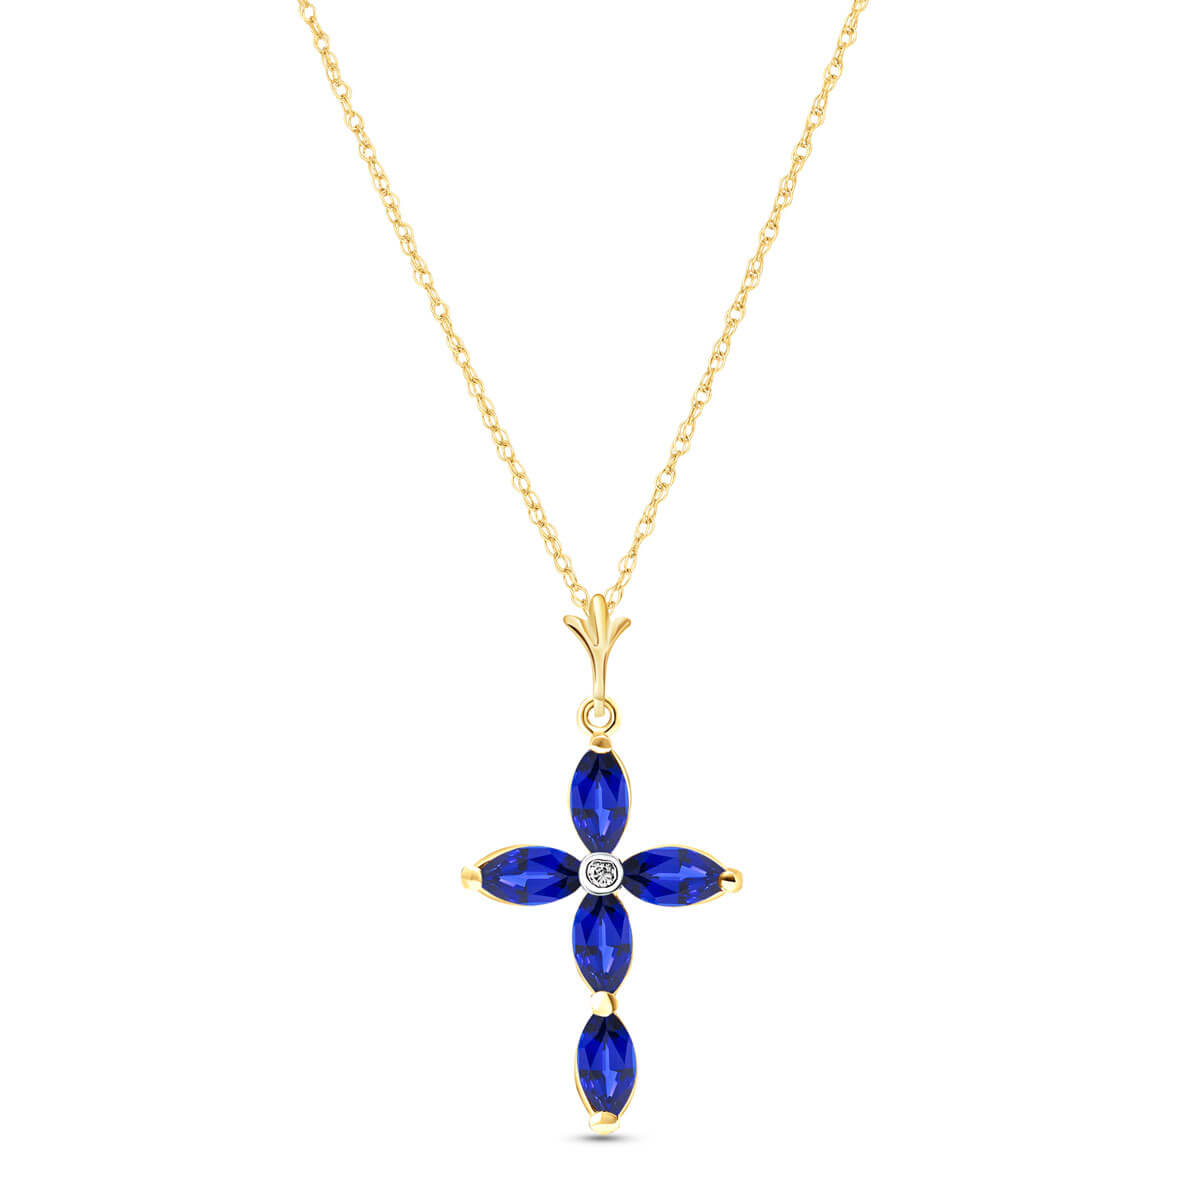 Marquise Cut Sapphire Pendant Necklace 1.1 ctw in 9ct Gold